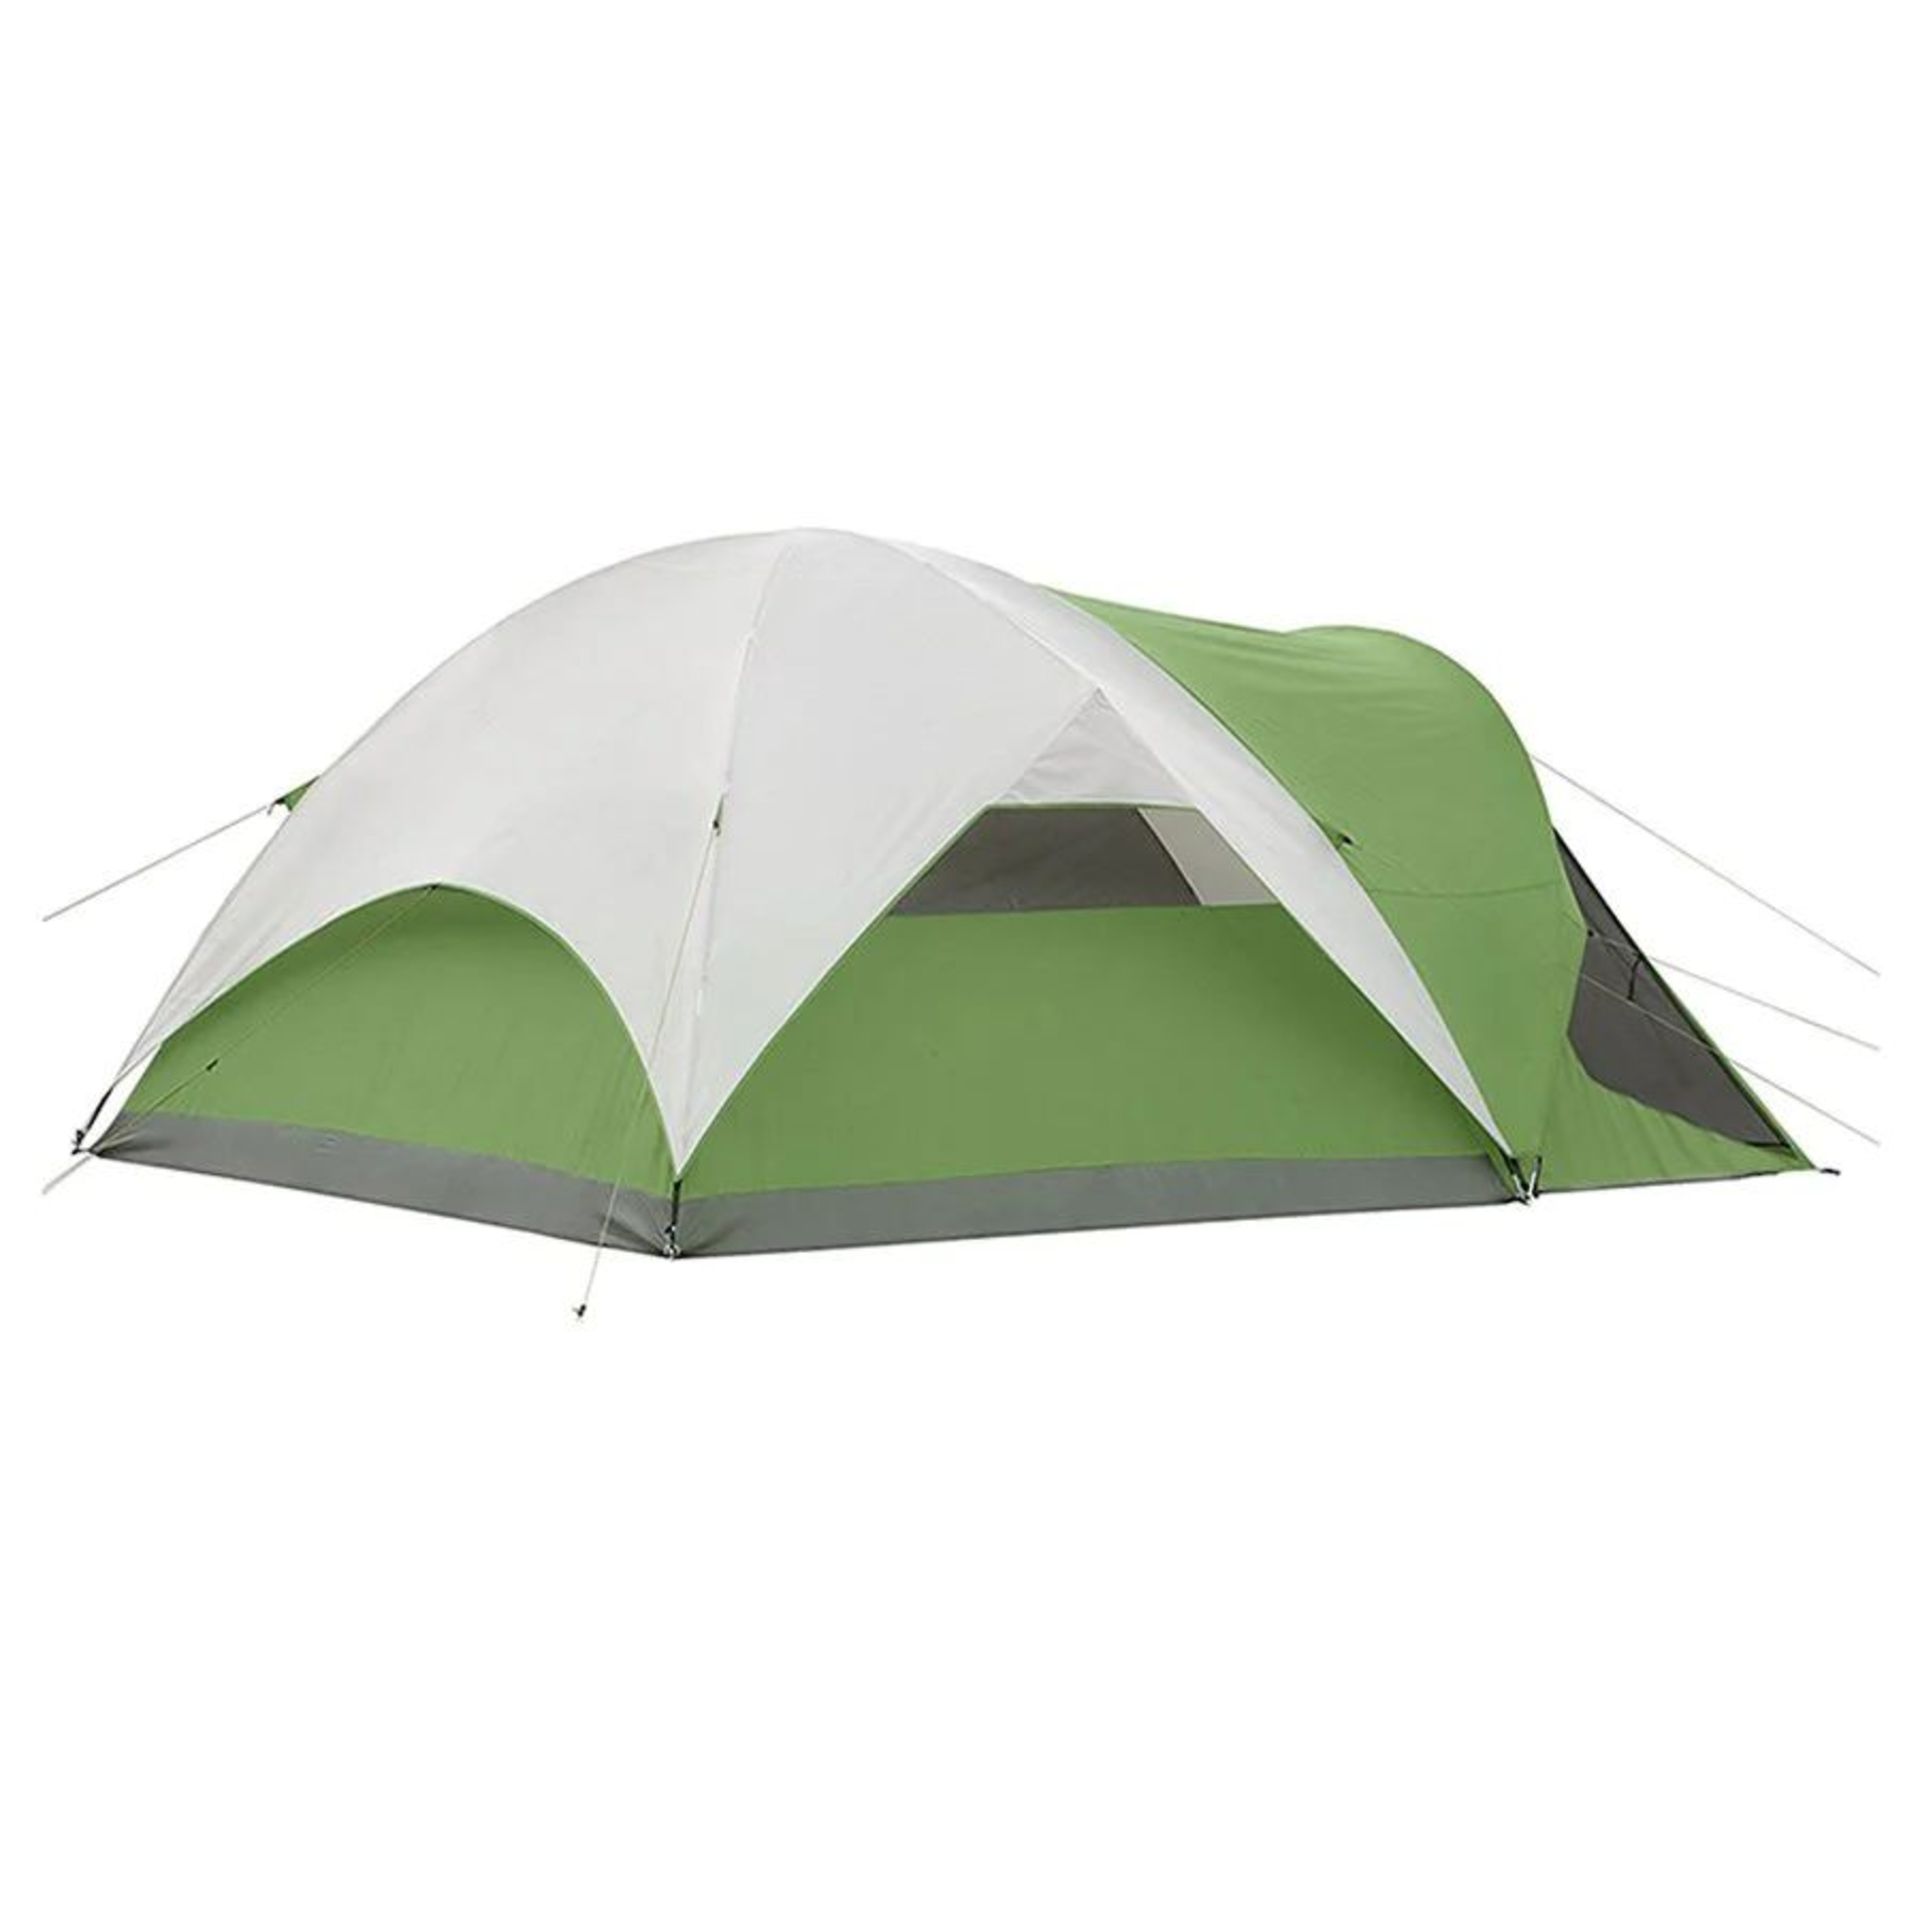 RBSM SPORTS 6-PERSON DOME CAMPING TENT W/ RAINFLY (NEW) (MSRP $300) - Image 3 of 4